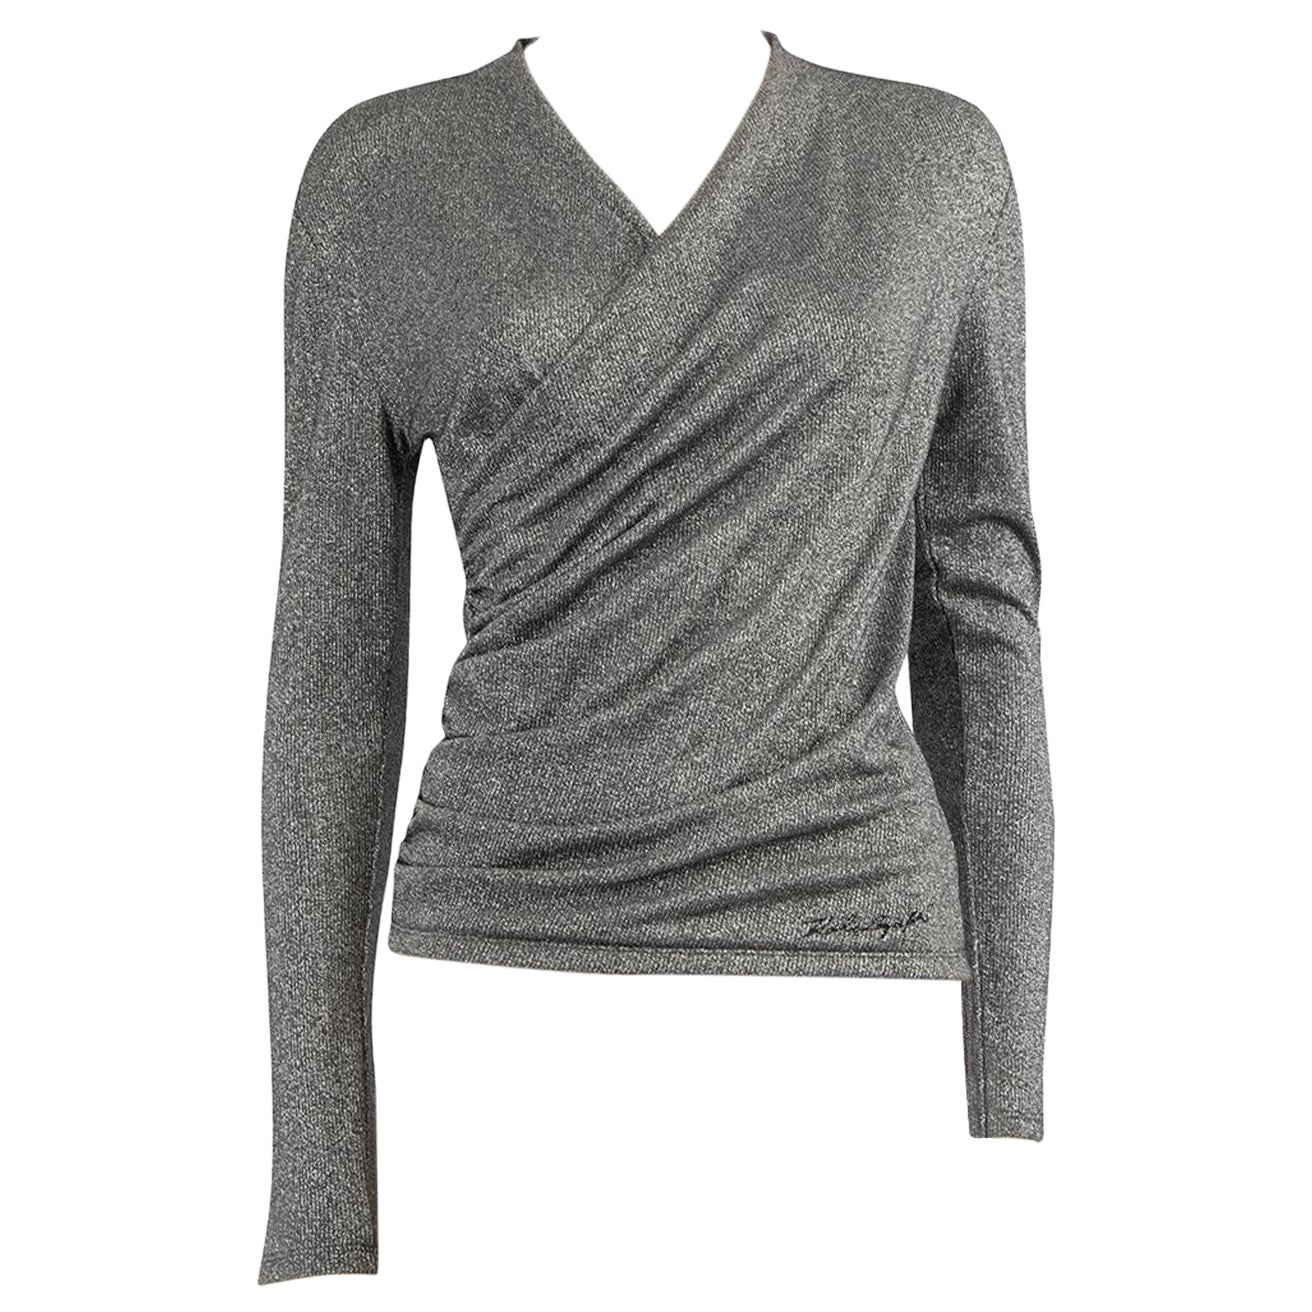 Karl Lagerfeld Silver Glitter Ruched Plunge Top Size S For Sale